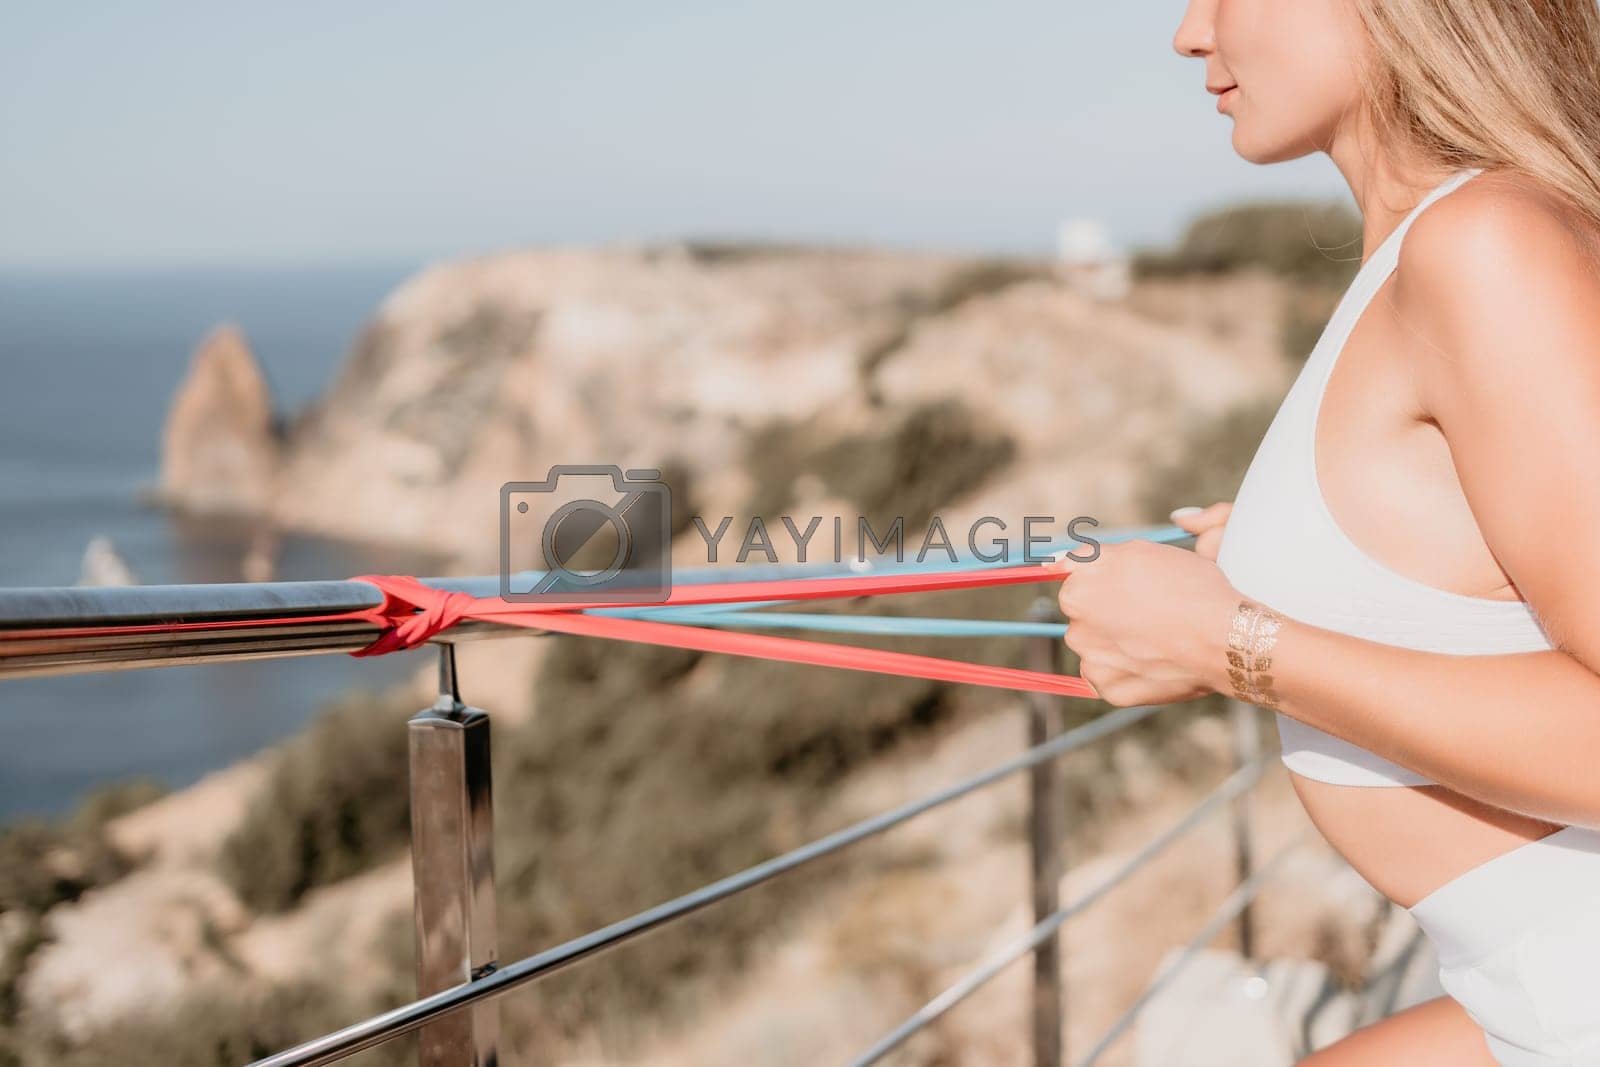 Royalty free image of Fitness woman sea. Outdoor workout with fitness rubber bands in park over beach. Female fitness yoga routine concept. Healthy lifestyle. Happy fit woman exercising with rubber band in park. by panophotograph